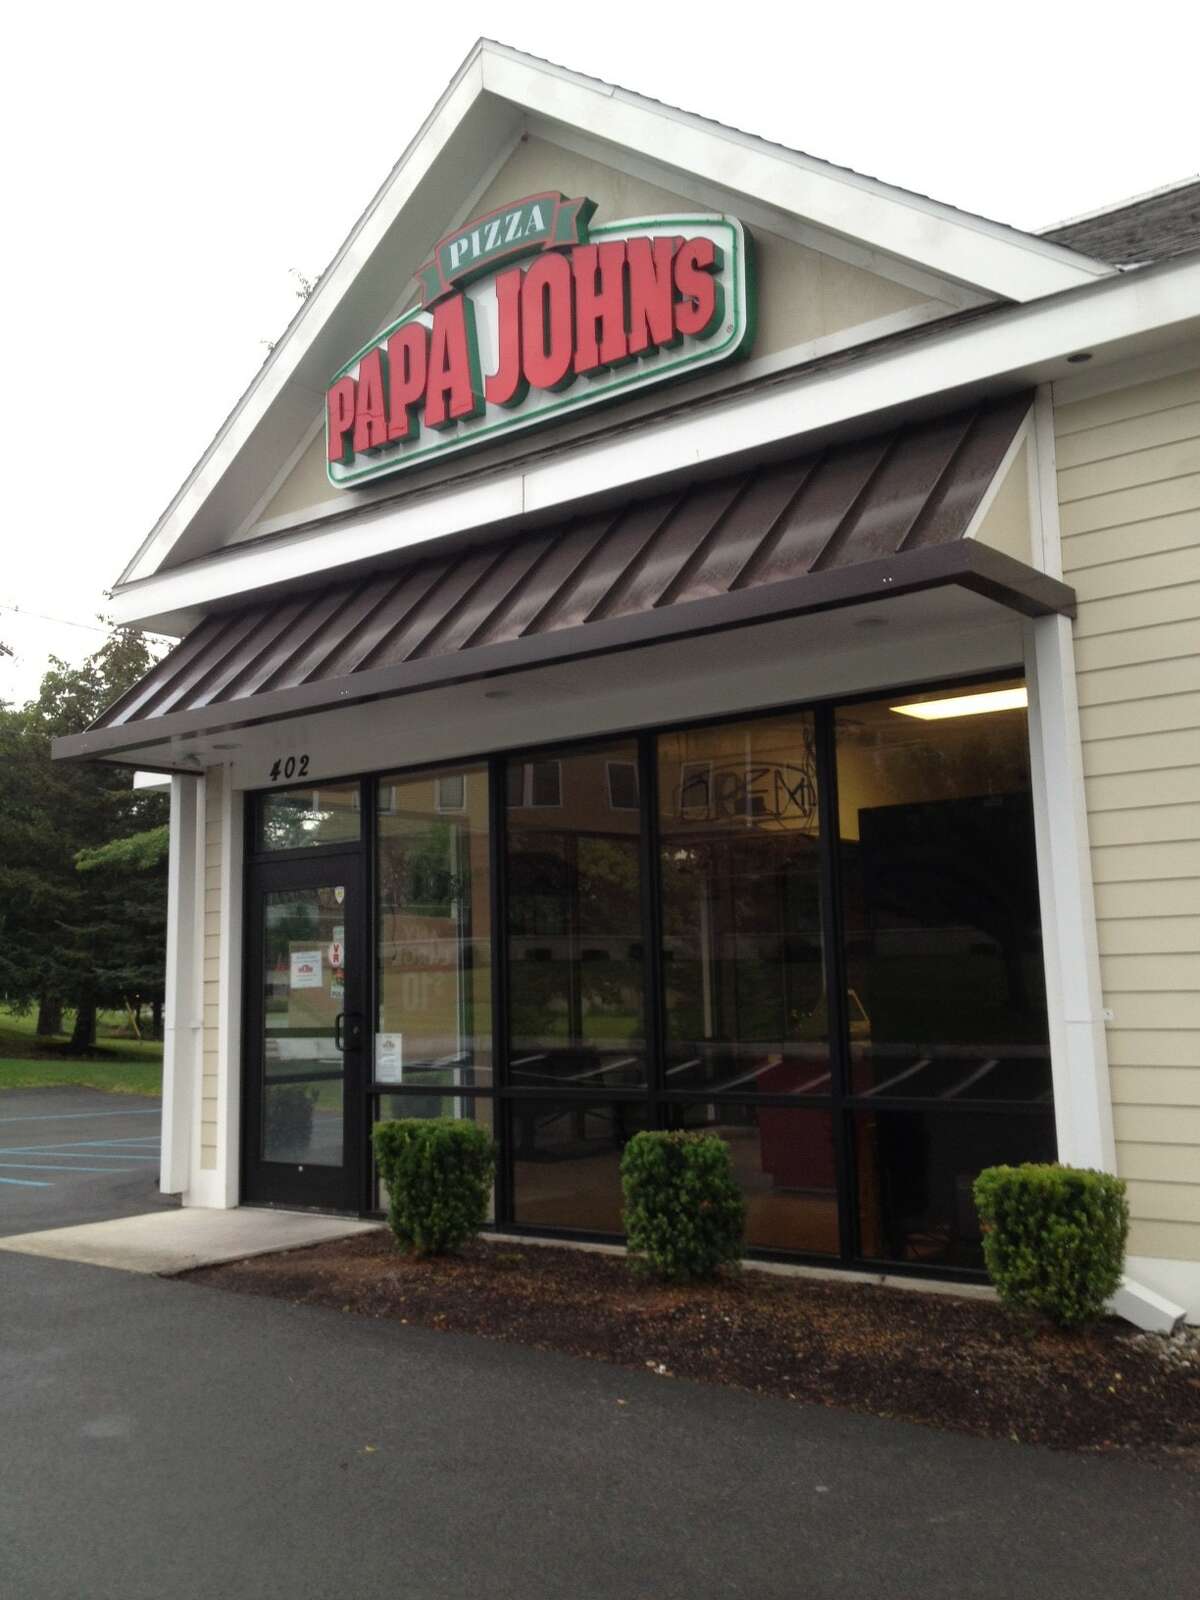 The Papa John's restaurant at the corner of Everett and Albany Shaker roads in Latham was one of six local Papa John's owned by franchisee Christian King, abruptly closed all six locations without advance warning on Saturday. (Paul Grondahl / Times Union)